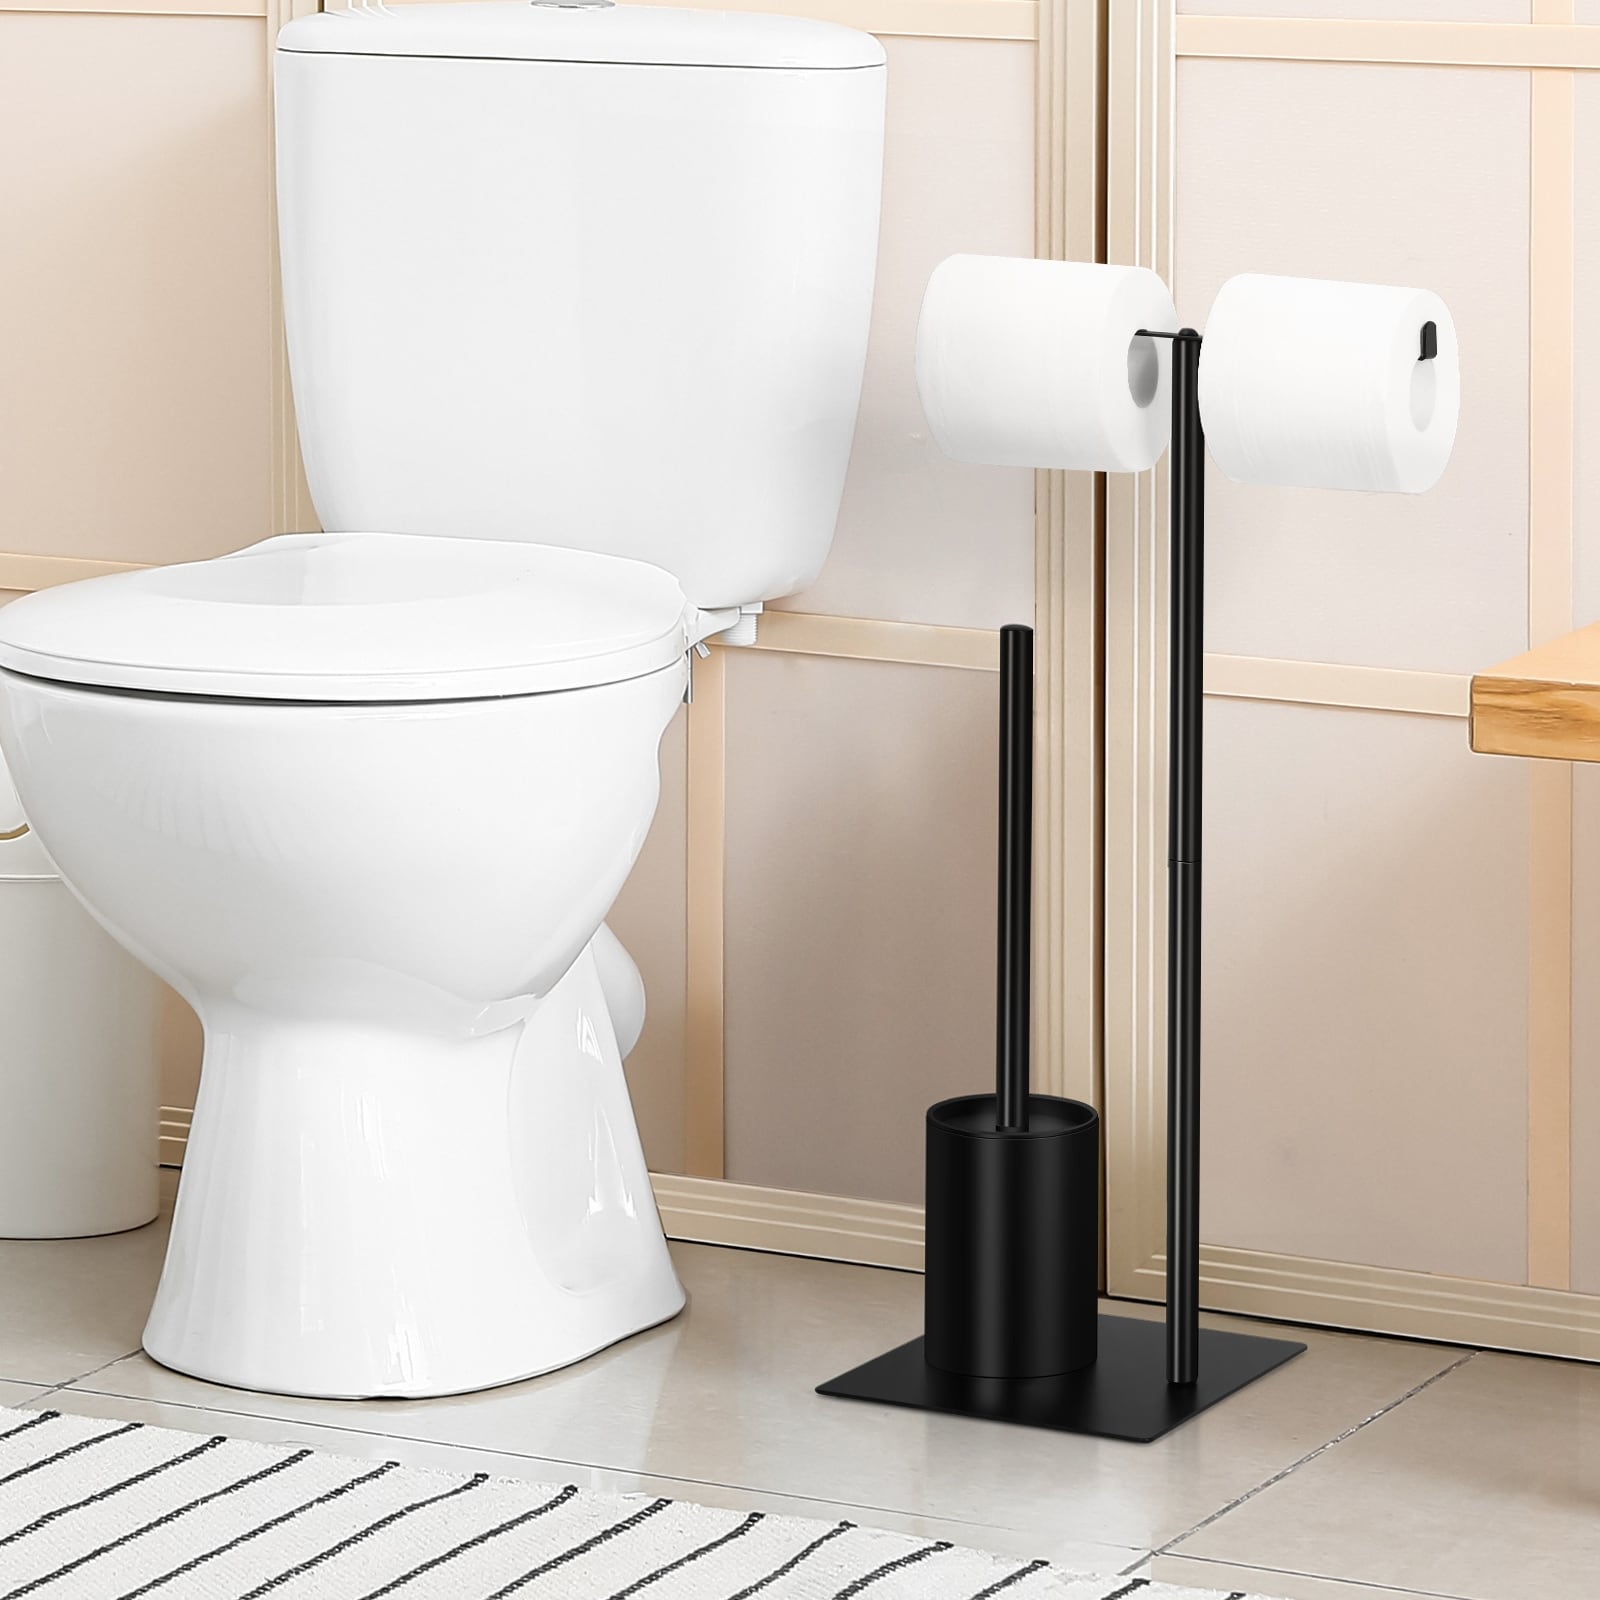 https://ak1.ostkcdn.com/images/products/is/images/direct/83810415e8c764f486481c759f352a978da03ee0/Toilet-Paper-Holder-Stand-with-Toilet-Brush-Holder.jpg